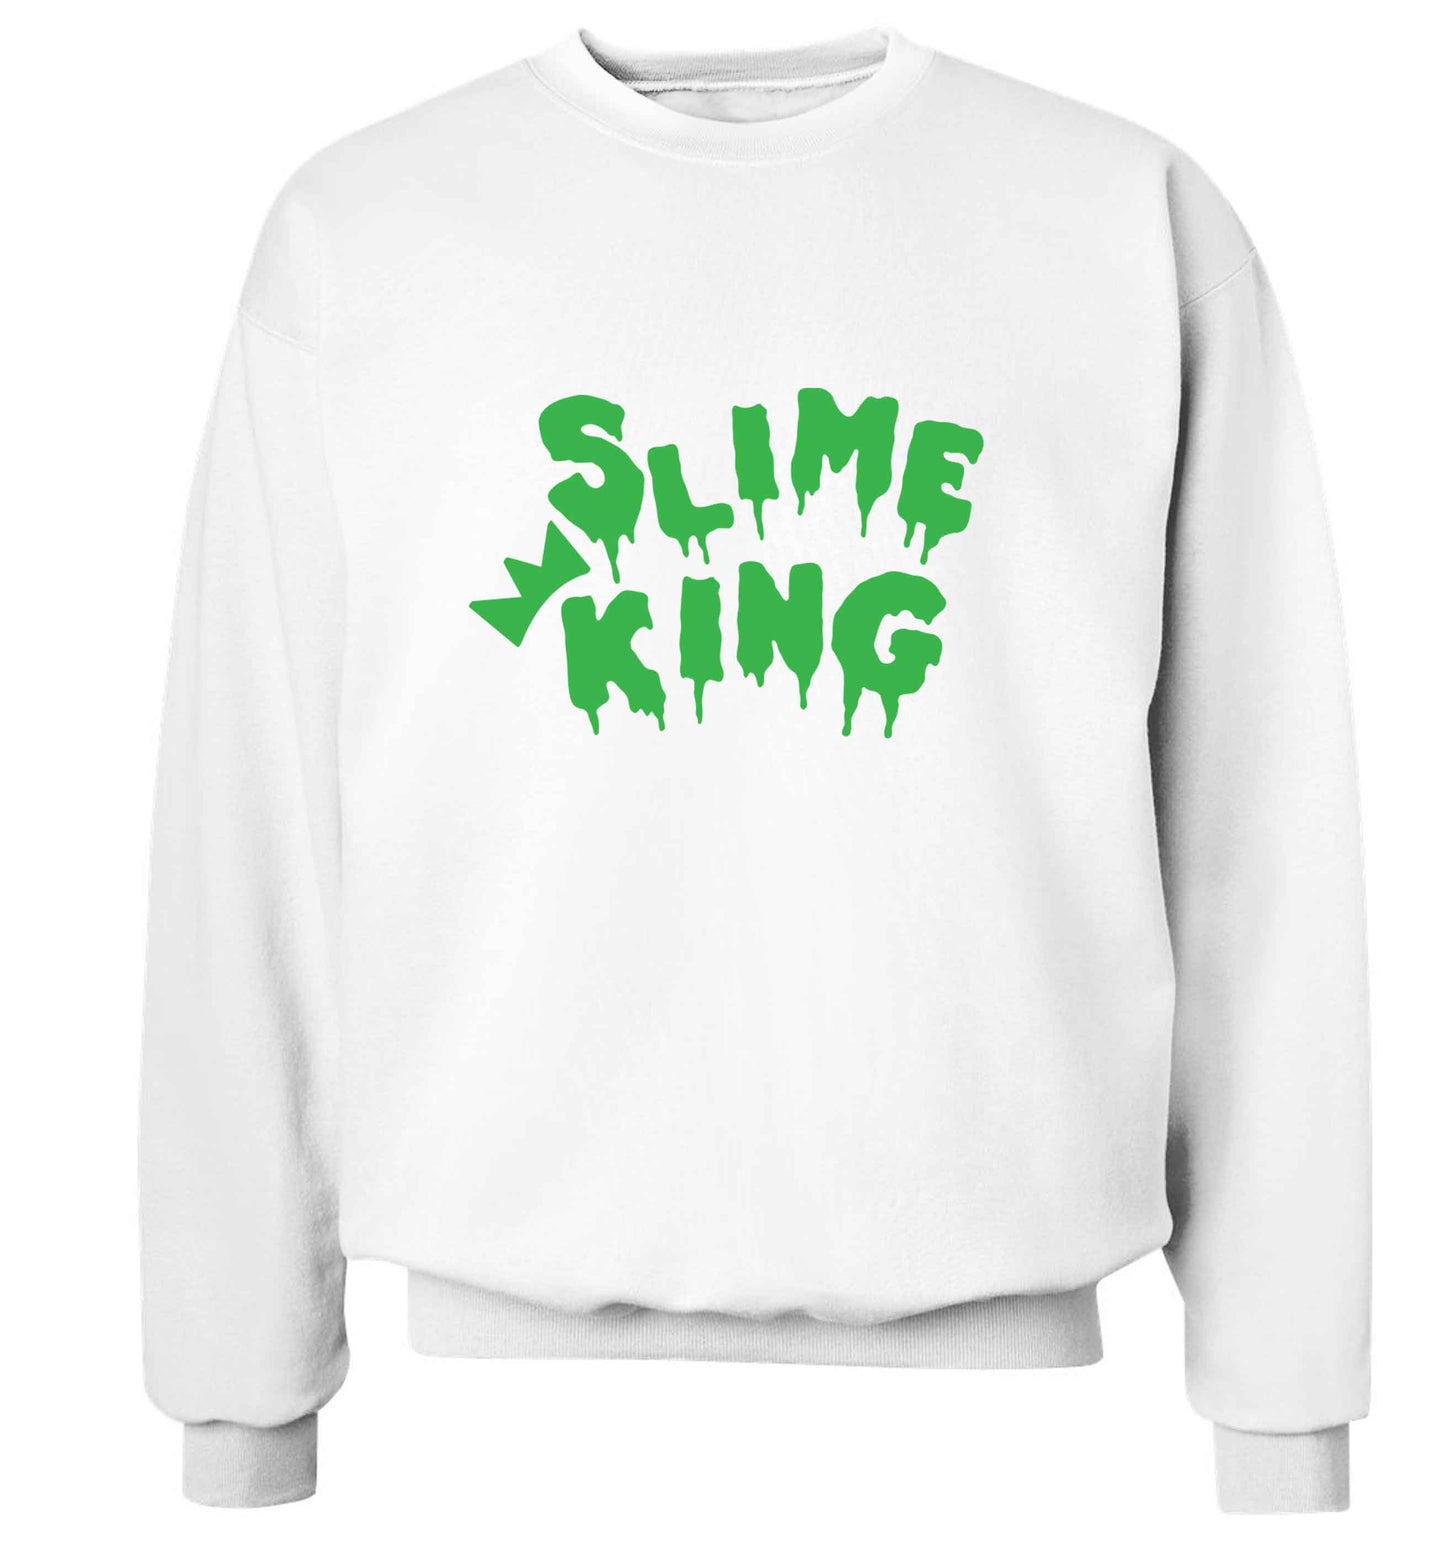 Neon green slime king adult's unisex white sweater 2XL